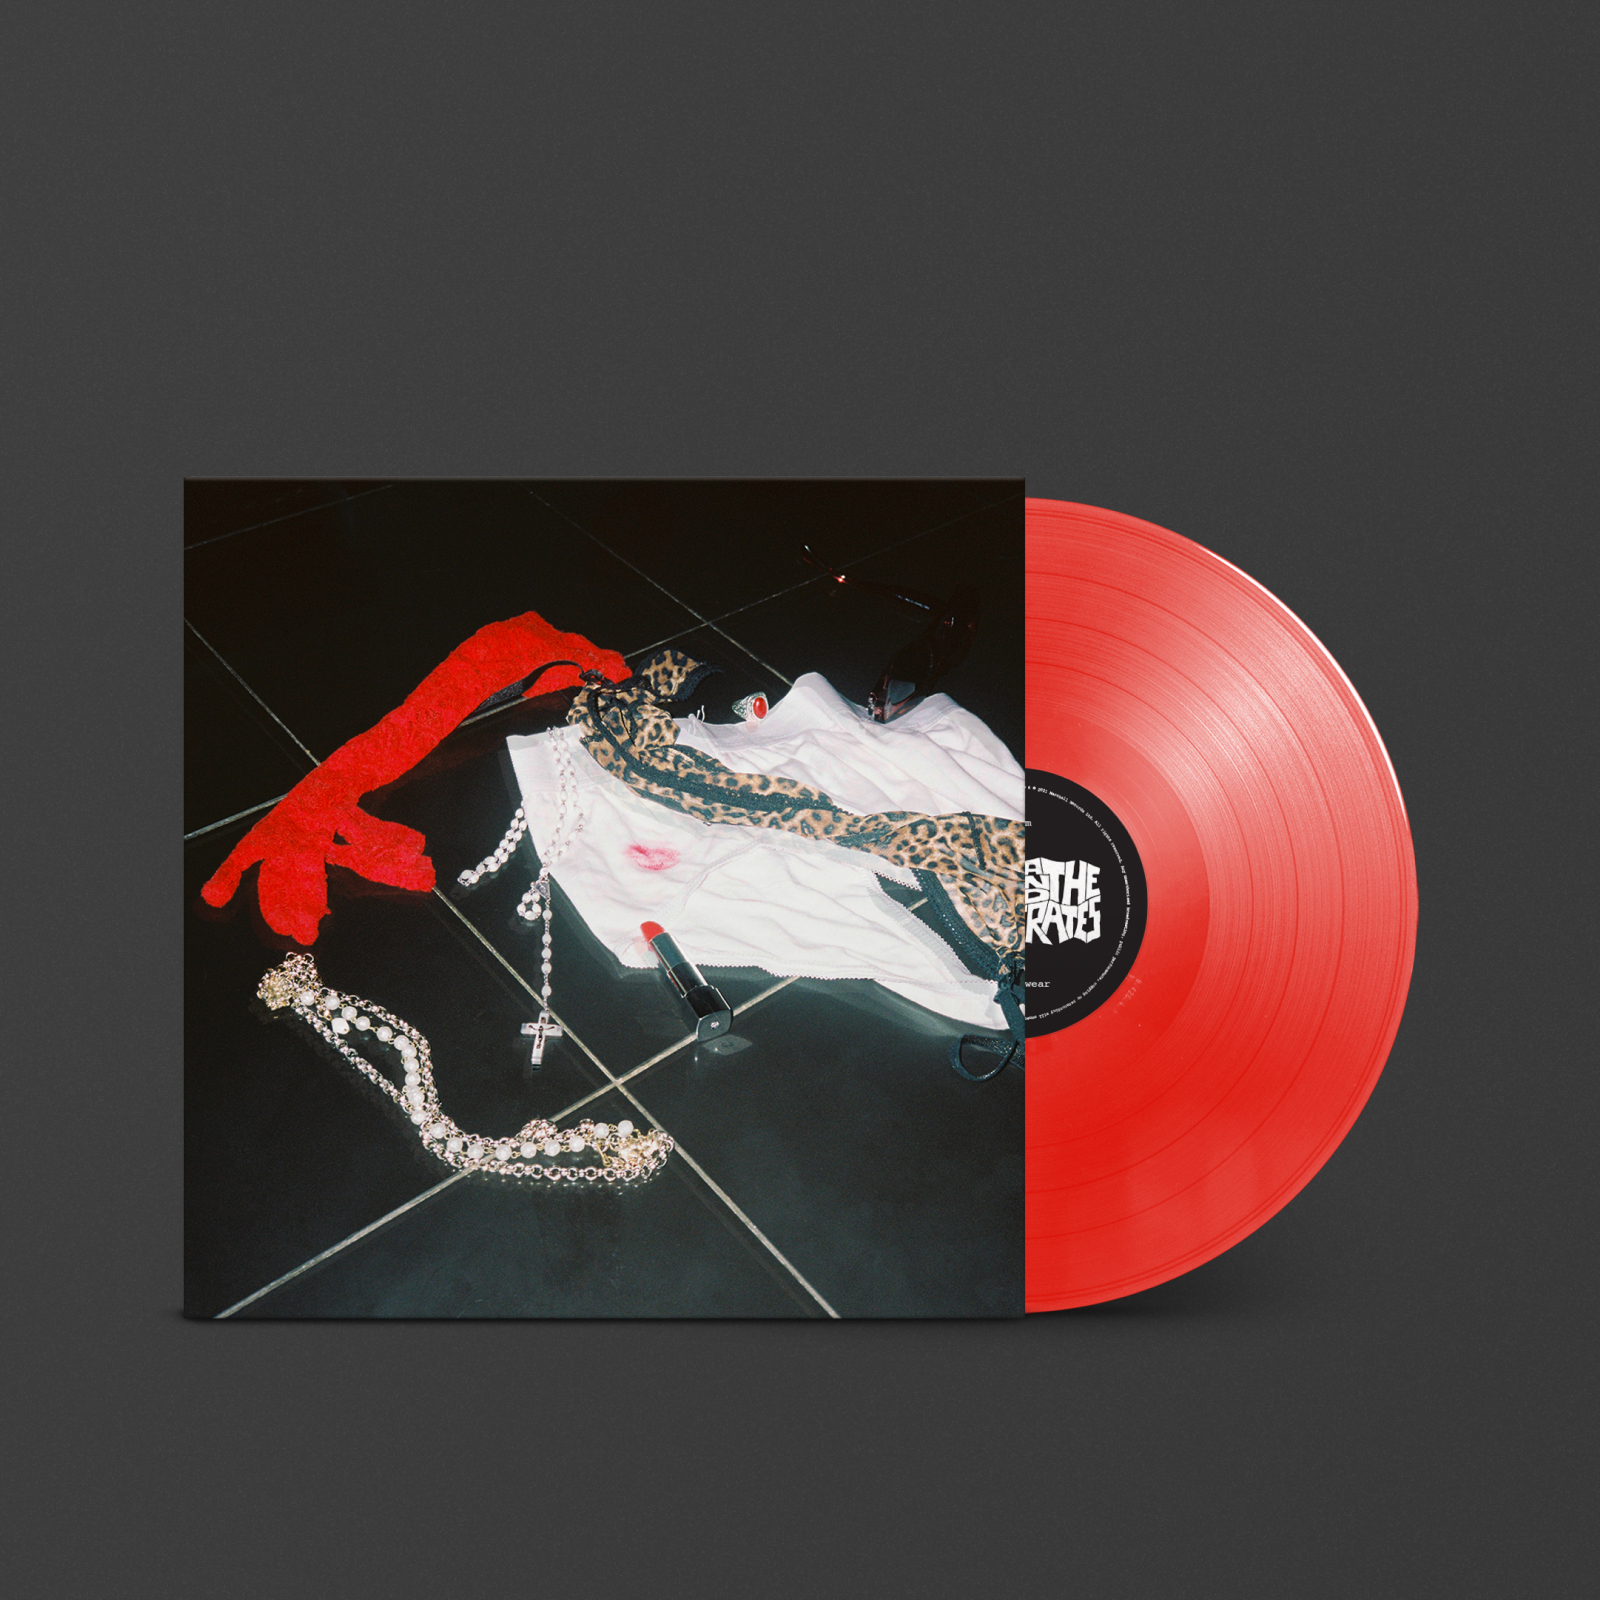 Red vinyl 'Underwear' record by 'Gen and the Degenerates'.